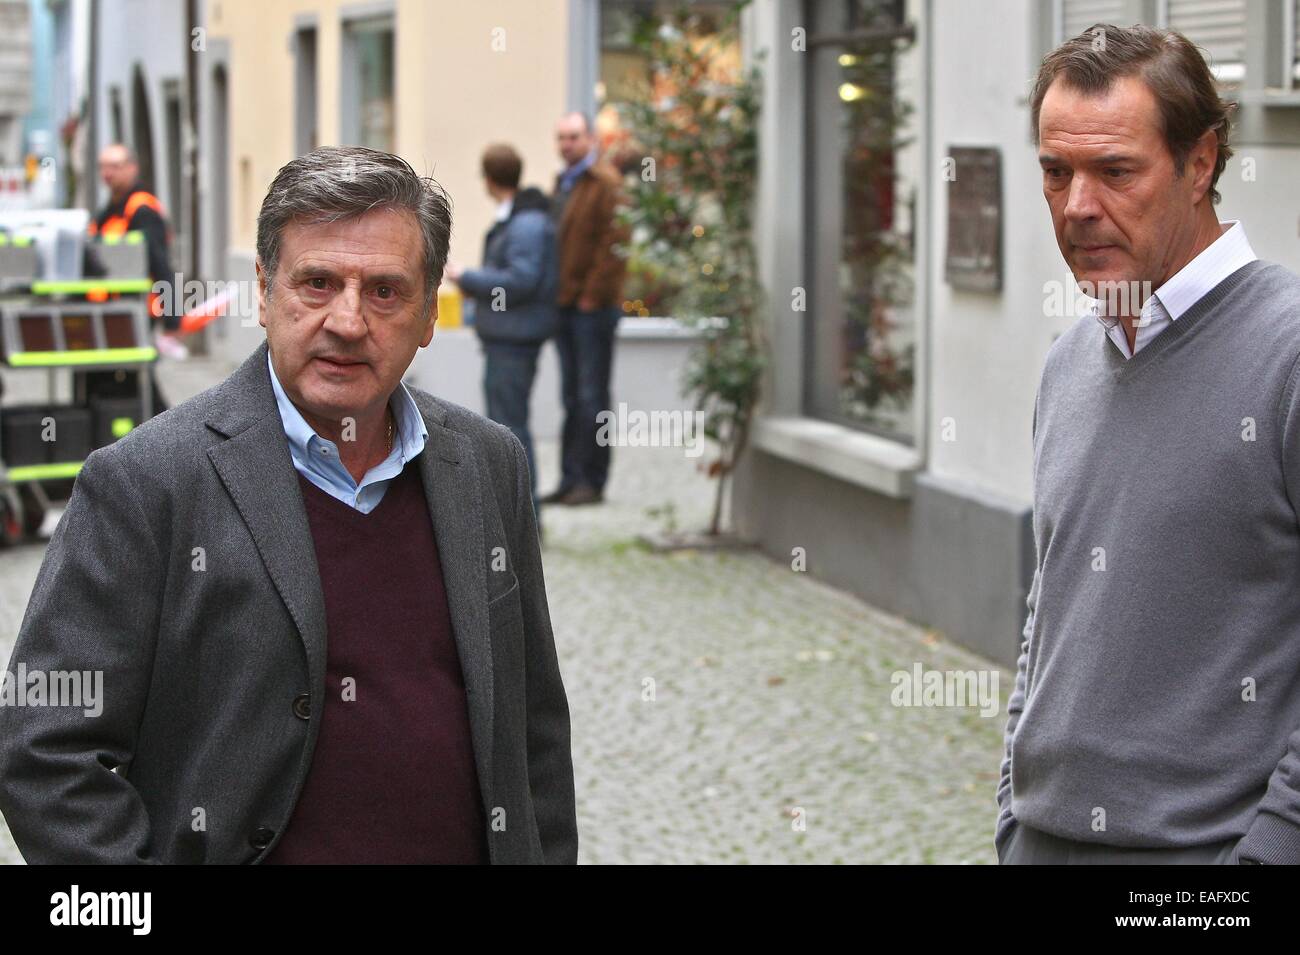 French actor Daniel Auteuil (L) and German actor Sebastian Koch pose on the set of the film 'Bamberski-Der Fall Kalinka' (lit. the Kalinka case) in Lindau, Germany, 14 November 2014. The French and German justice system have been dealing with the Kalinka case since three decades. The film focusses on the death of the 14-year old girl and her father's actions of vigilantism. Photo: Karl-Josef Hildenbrand/dpa Stock Photo